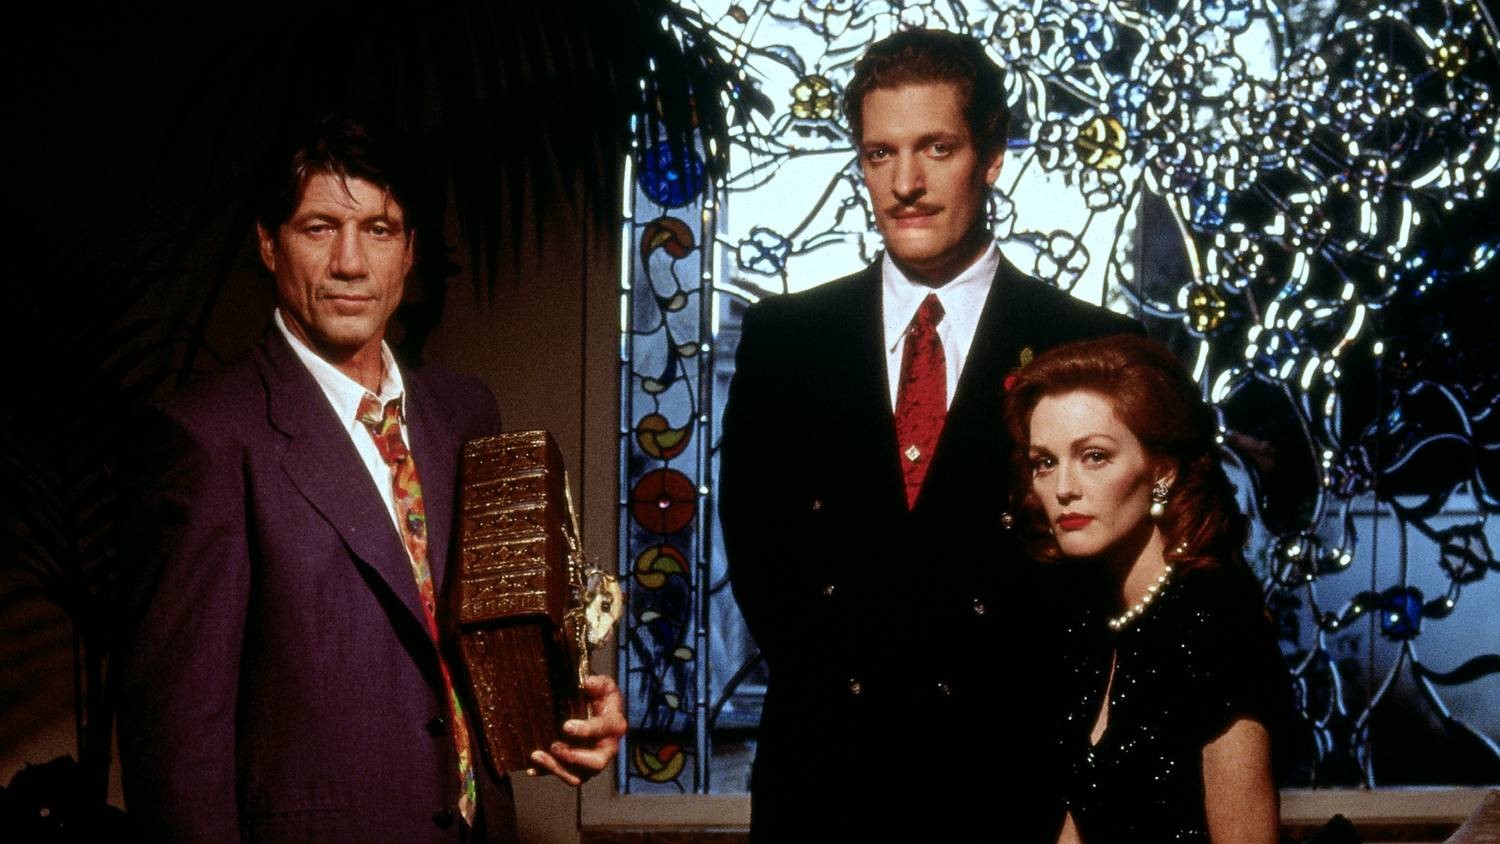 Three of the cast members of Cast a Deadly Spell - including Fred Ward as H. P. Lovecraft